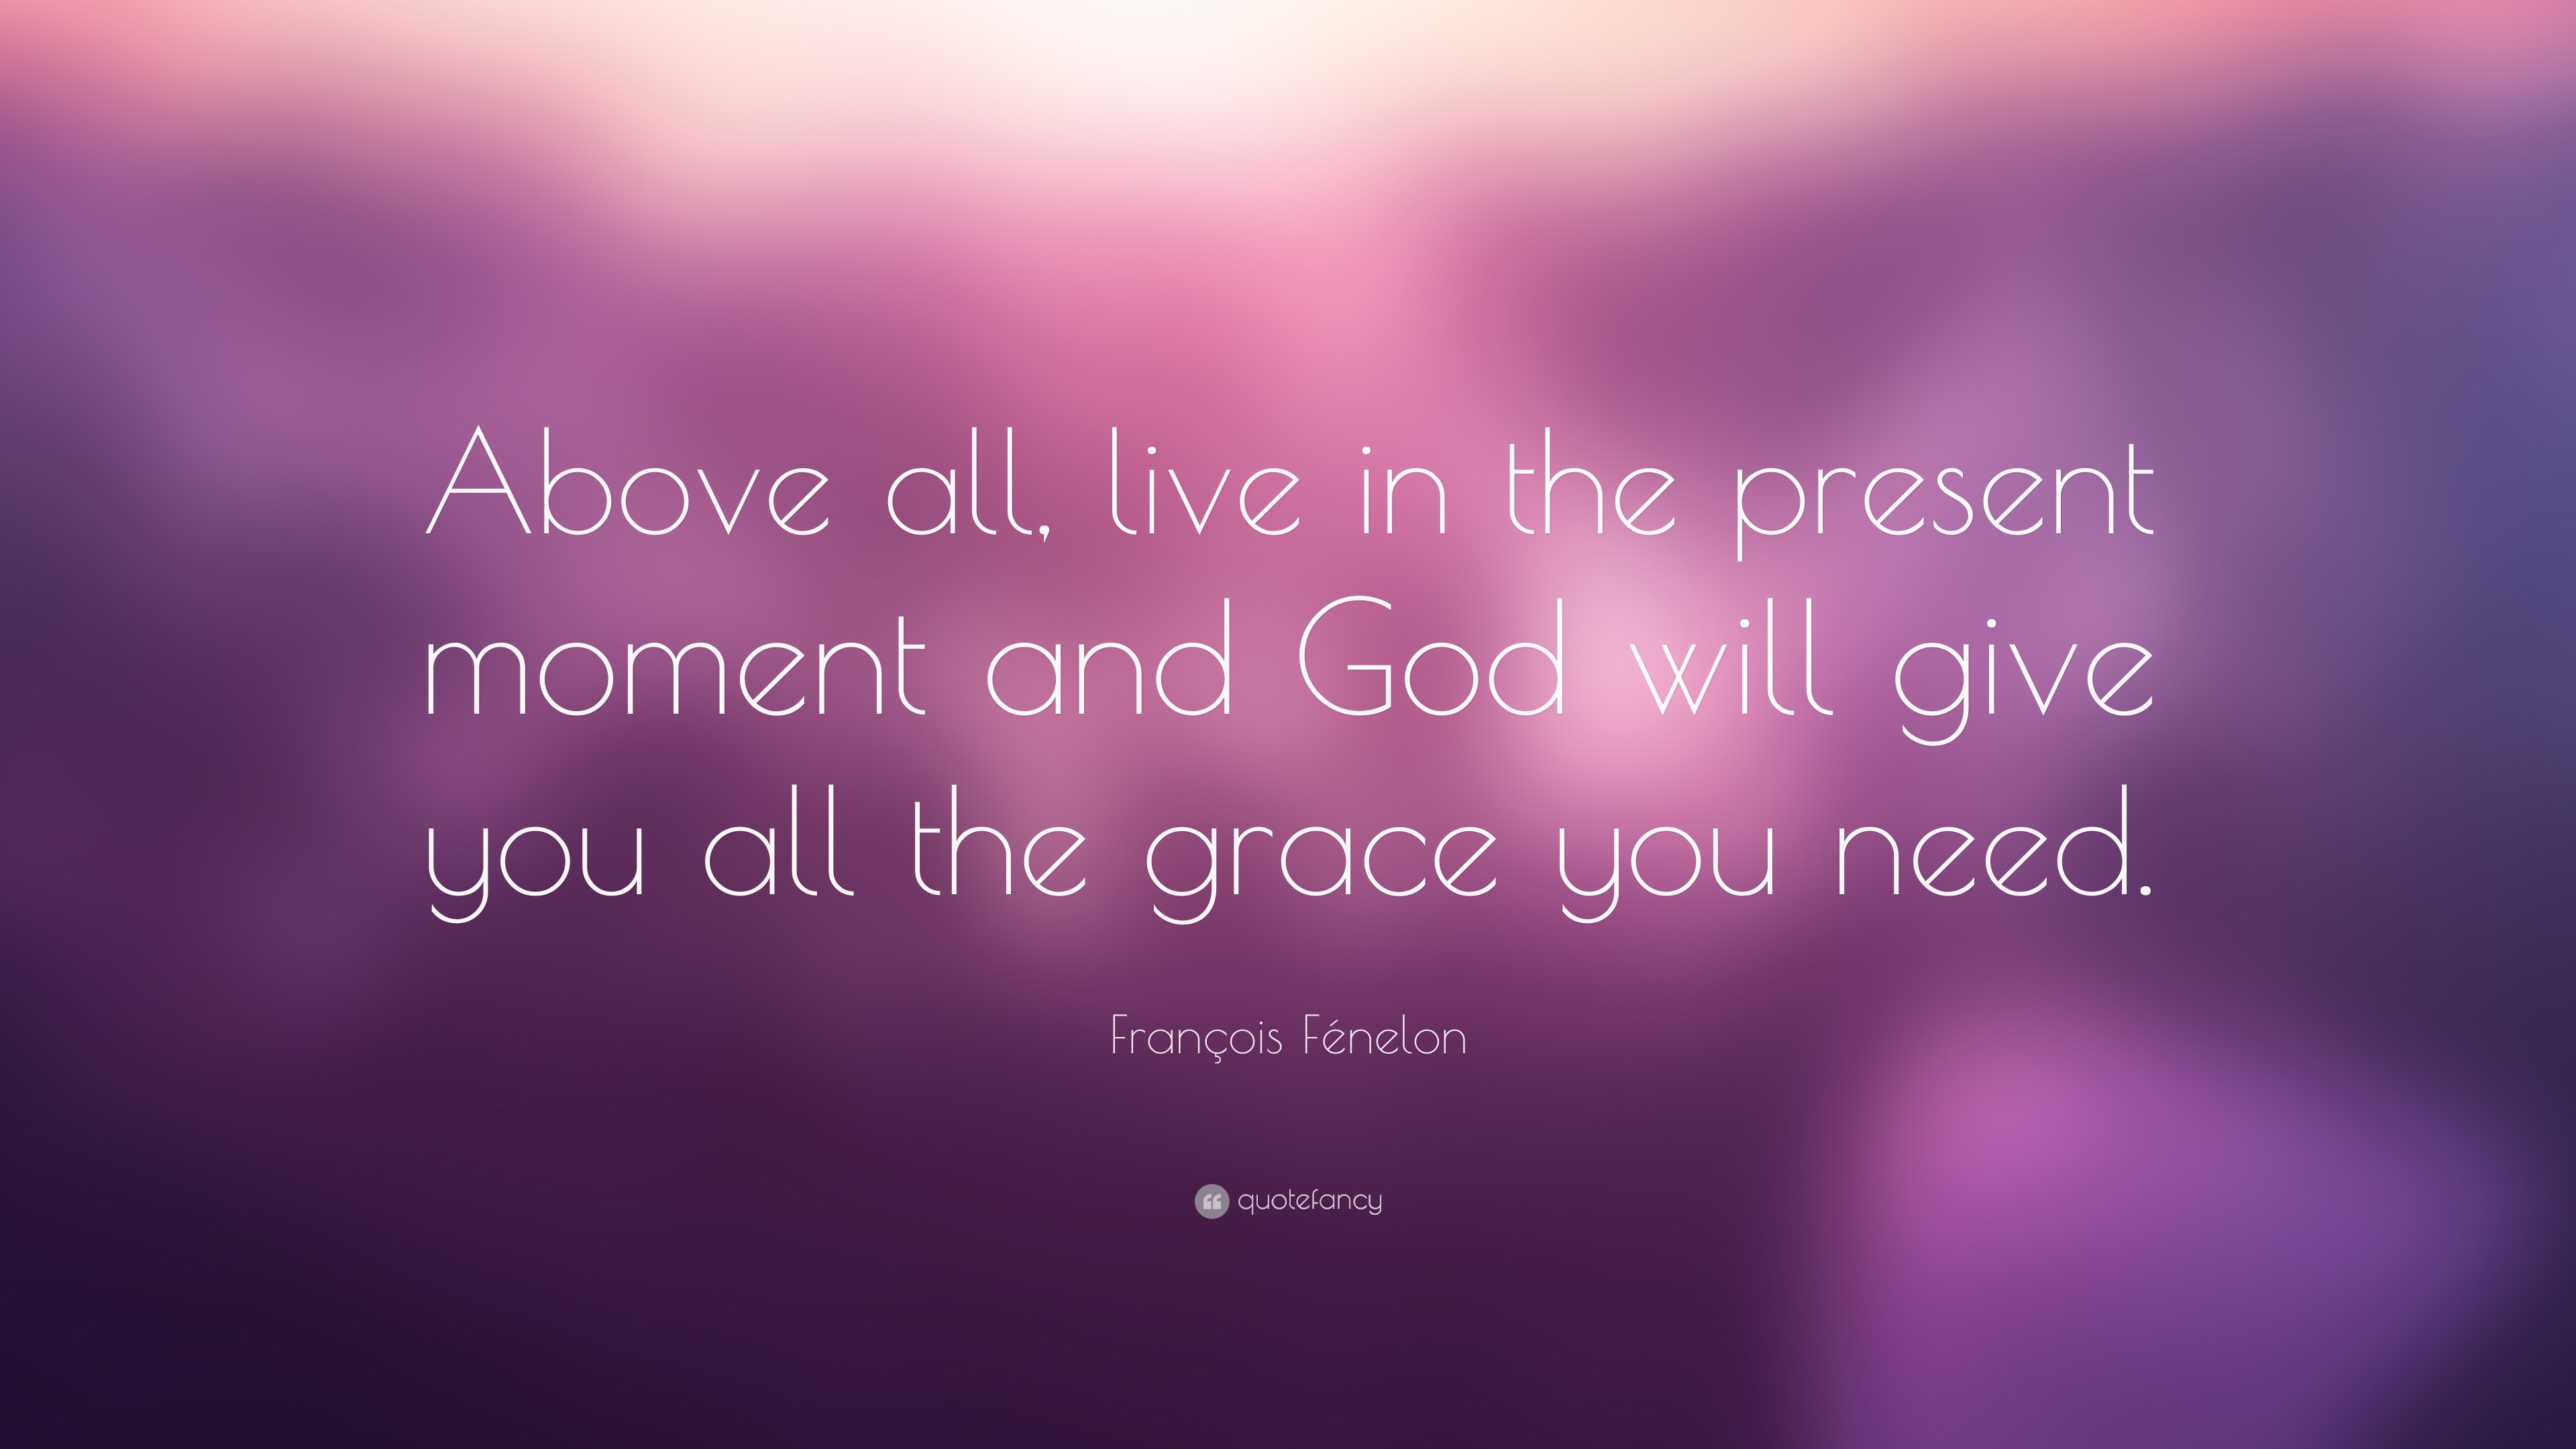 François Fénelon Quote: “Above all, live in the present moment and God ...